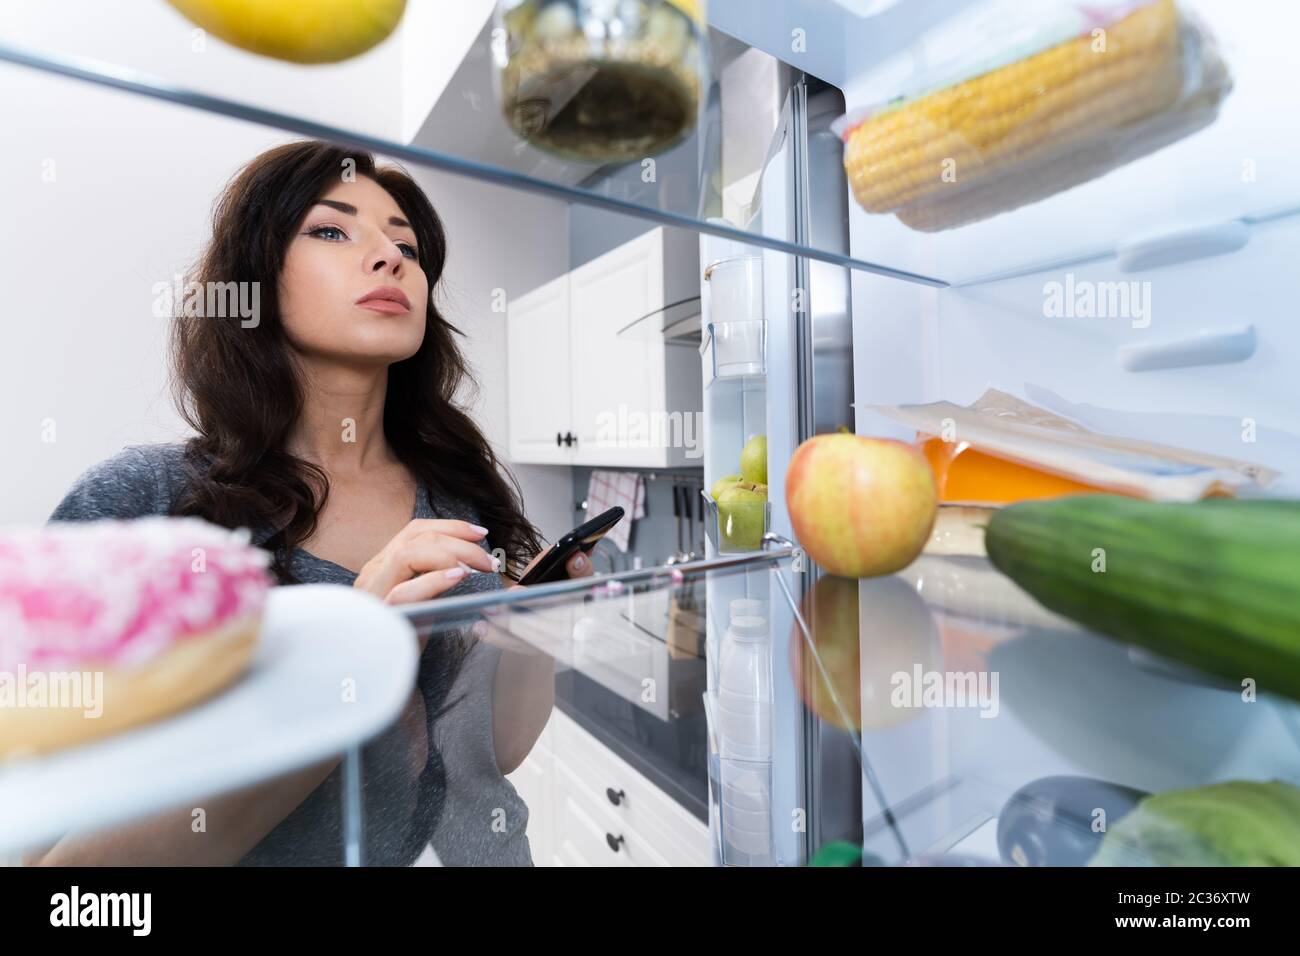 Grocery Shopping List Convenient Mobile Phone App Stock Photo